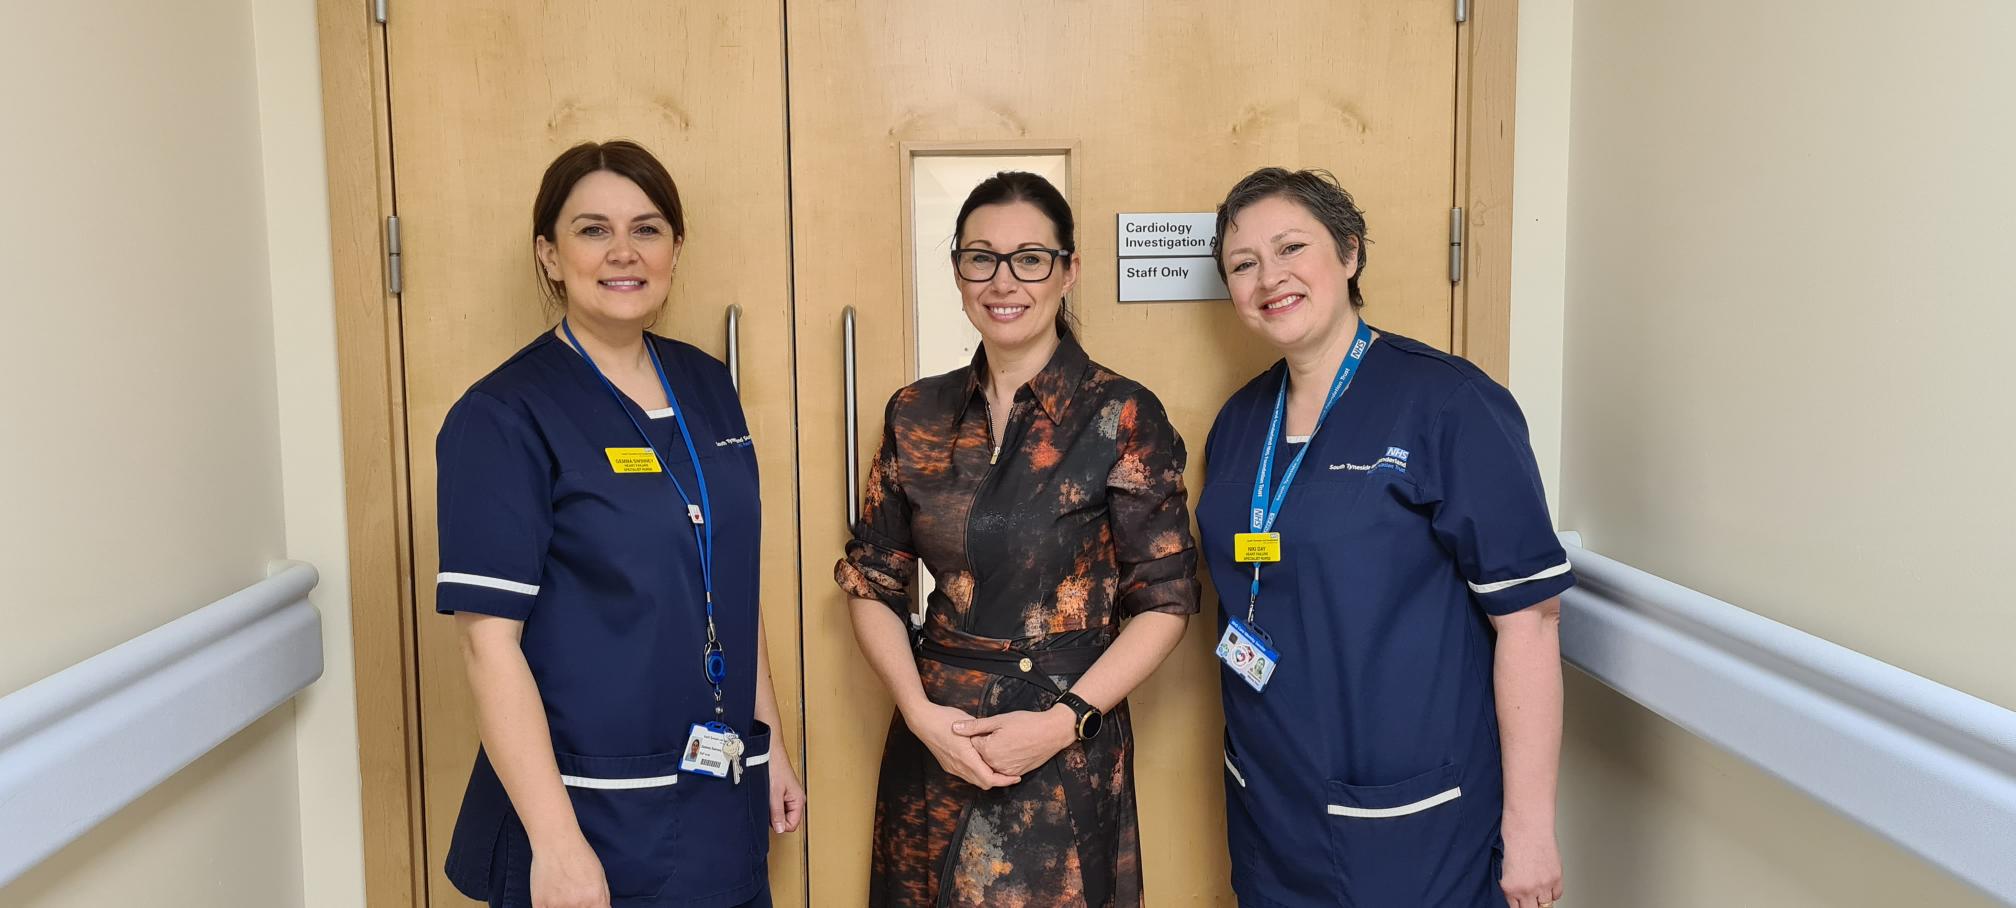 Heart Failure Specialist Nurses Gemma Swinney, left, and Nikola Day, right, with Advanced Clinical Pharmacist Janine Beezer, who are part of the STSFT Cardiology Team..jpg